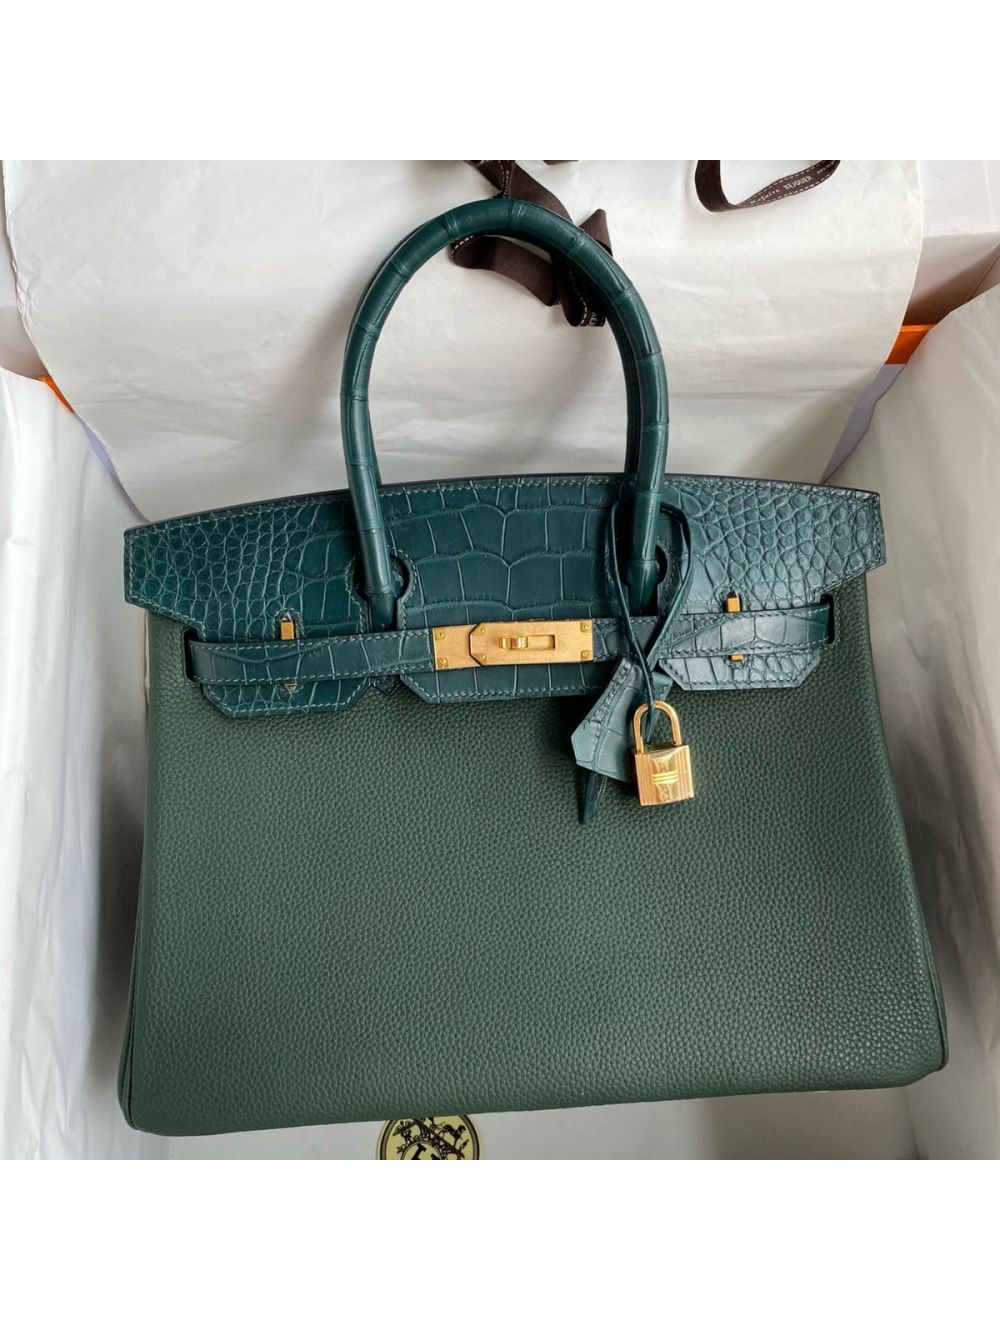 Replica Hermes Touch Birkin 30 Bag in Green Clemence and Matte